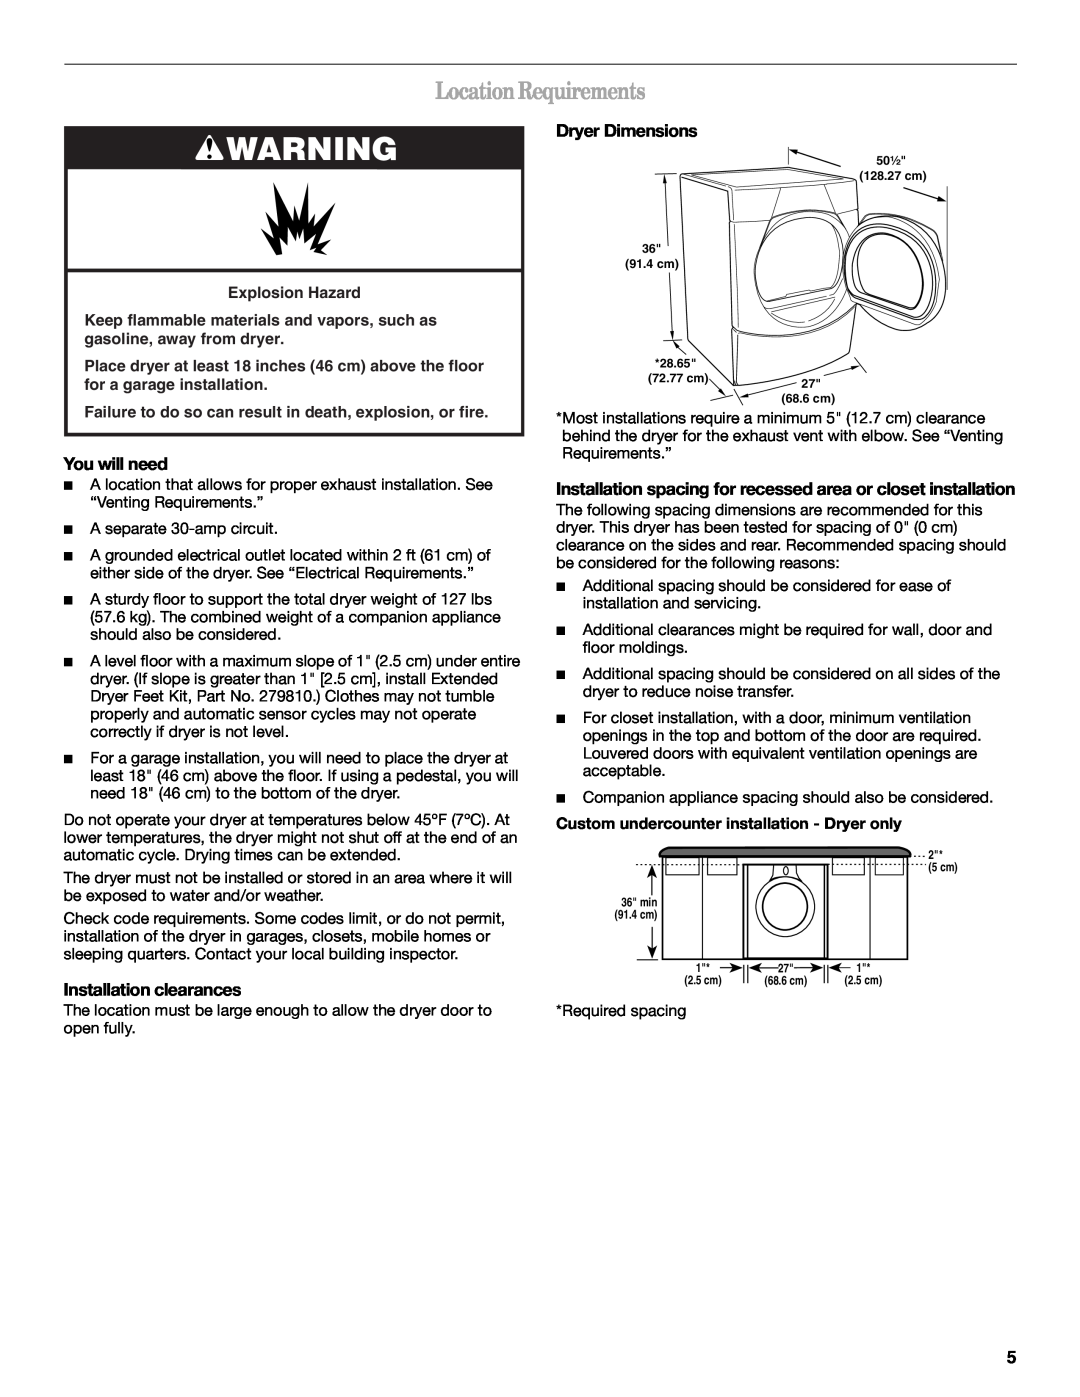 Whirlpool 8578901 manual Location Requirements, Dryer Dimensions, You will need, Installation clearances, Explosion Hazard 